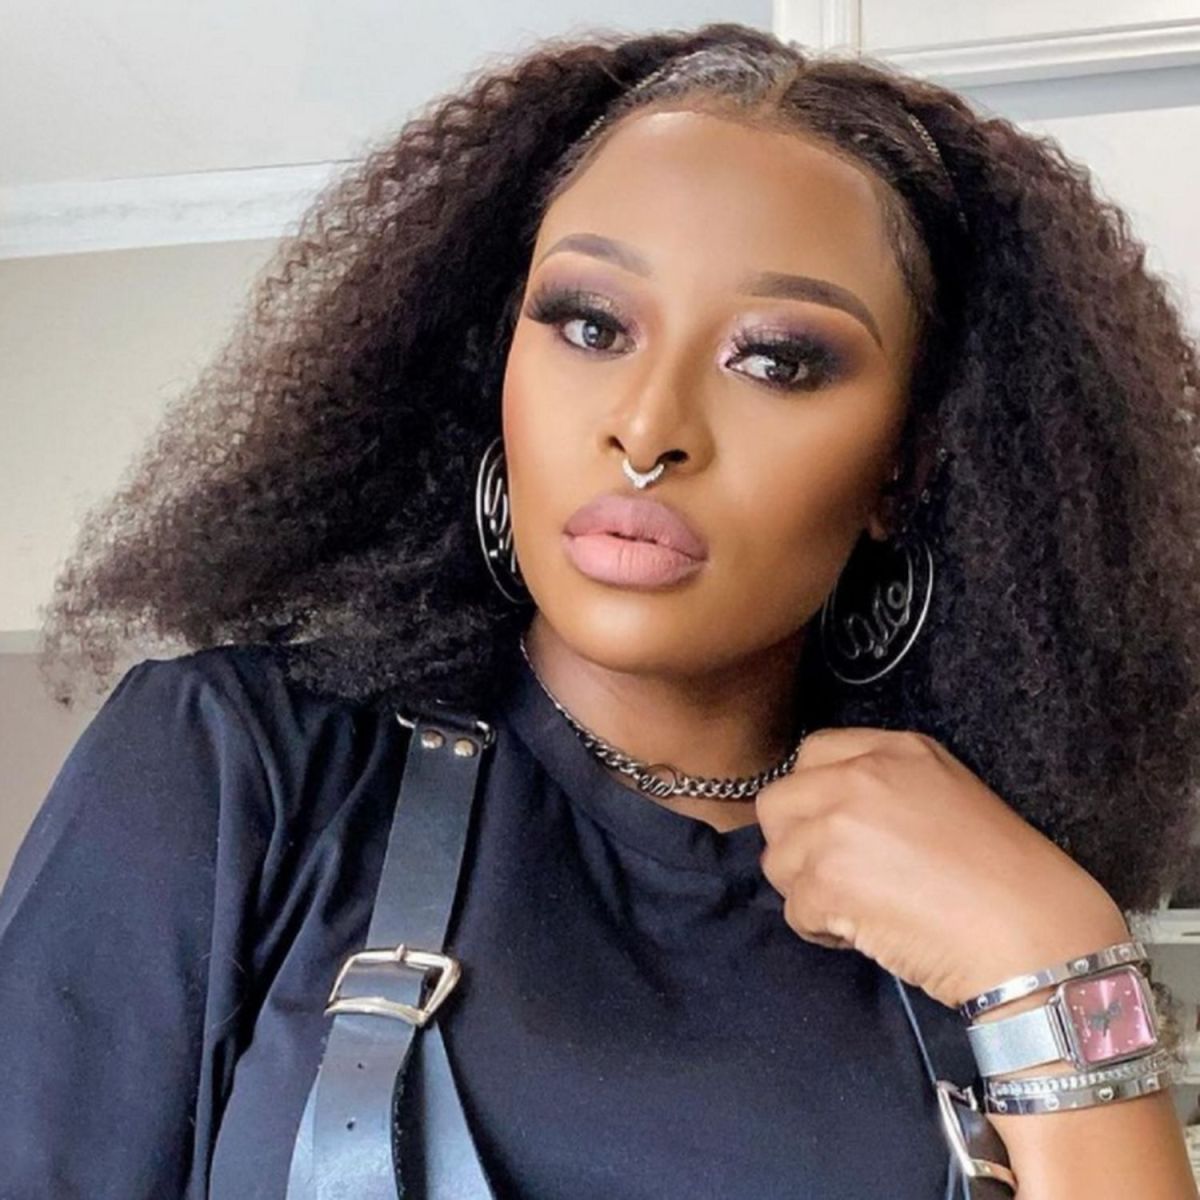 Netizens Criticise Dj Zinhle Over High Price Of Her Era Bag, Similar To The One At Shein 1